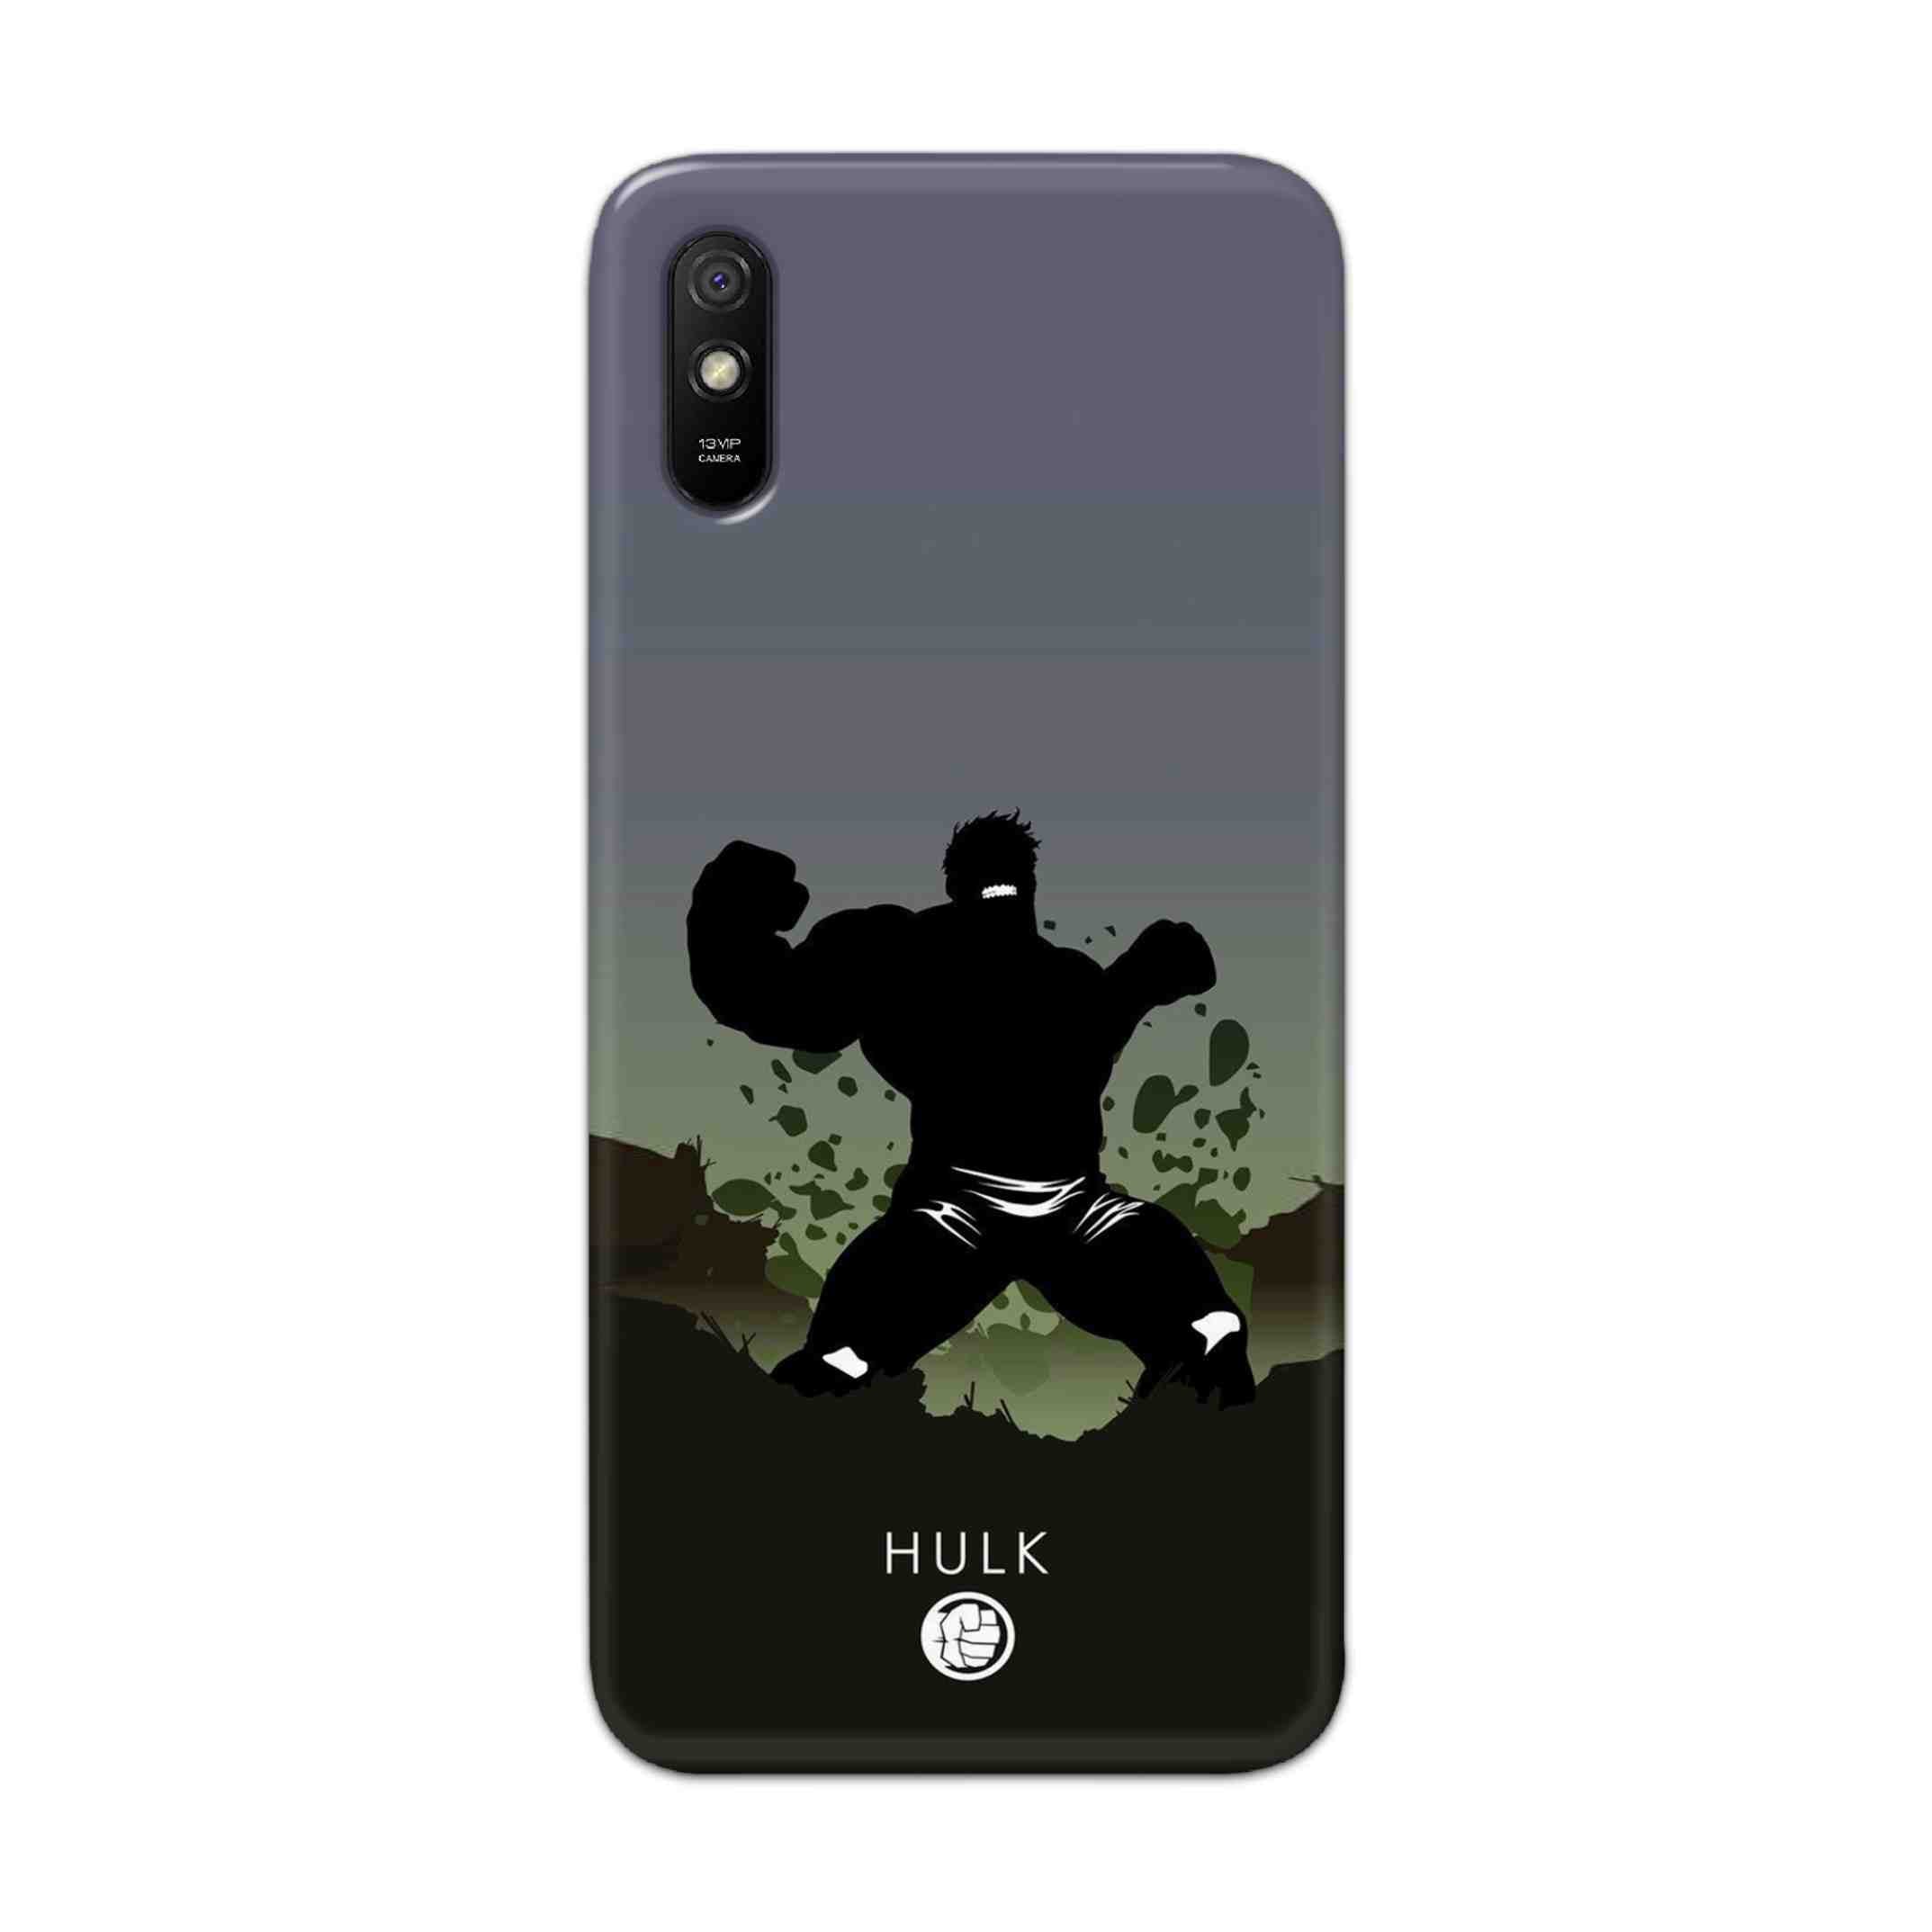 Buy Hulk Drax Hard Back Mobile Phone Case Cover For Redmi 9A Online